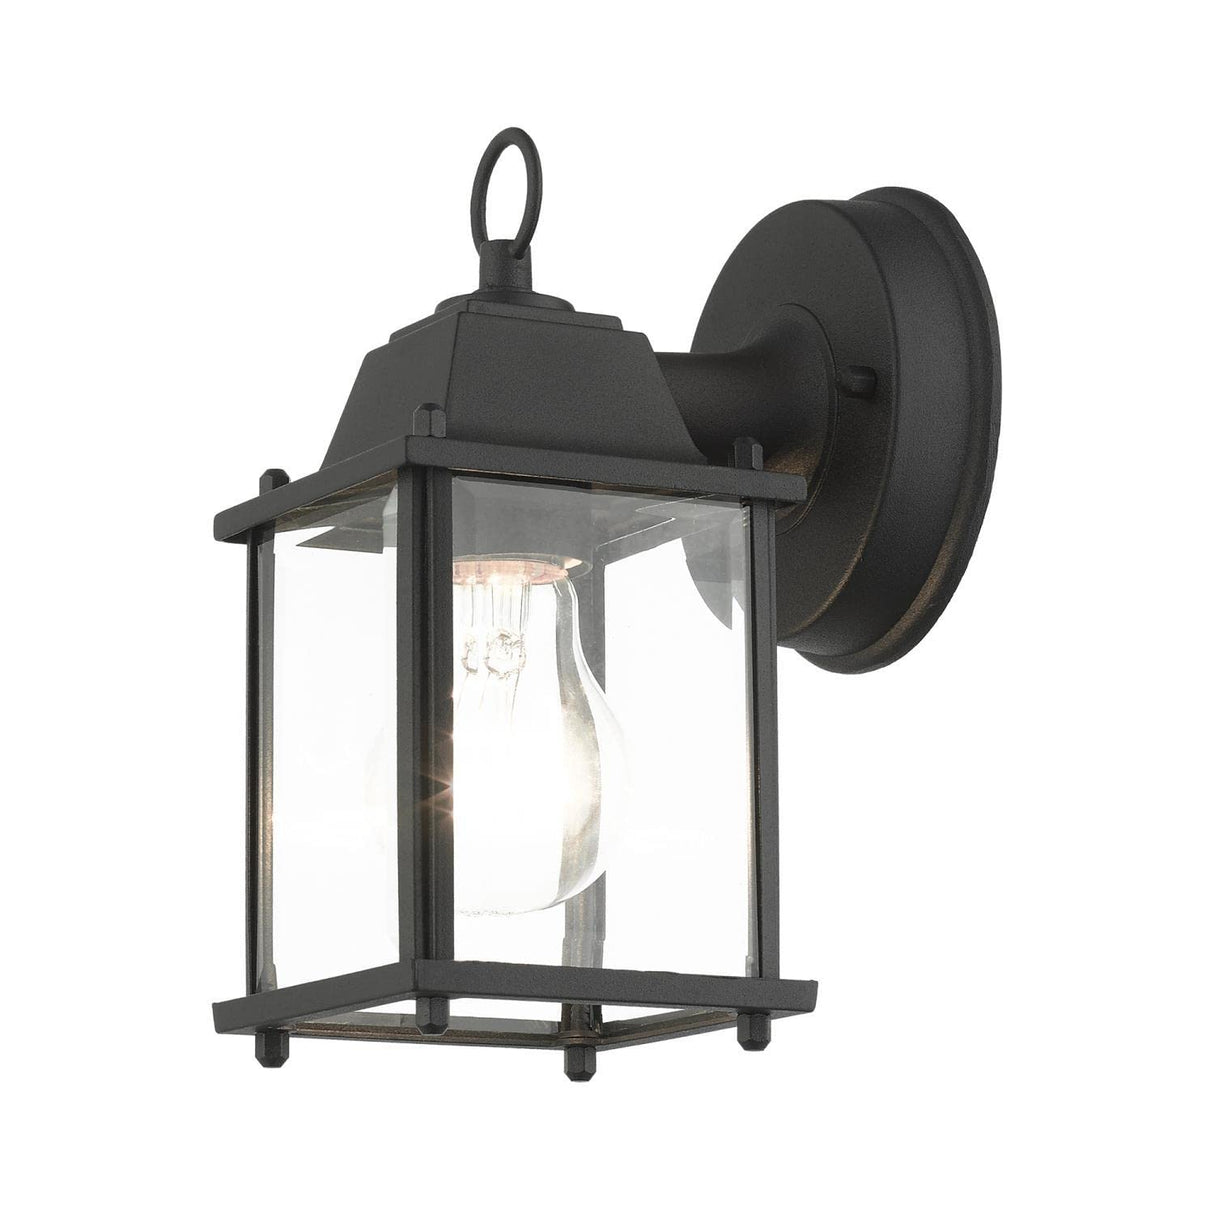 Livex Lighting 7506-14 Frontenac Traditional 1-Light Outdoor Wall Lantern with Clear Beveled Glass Shades, 8" x 4.75" x 8", Black